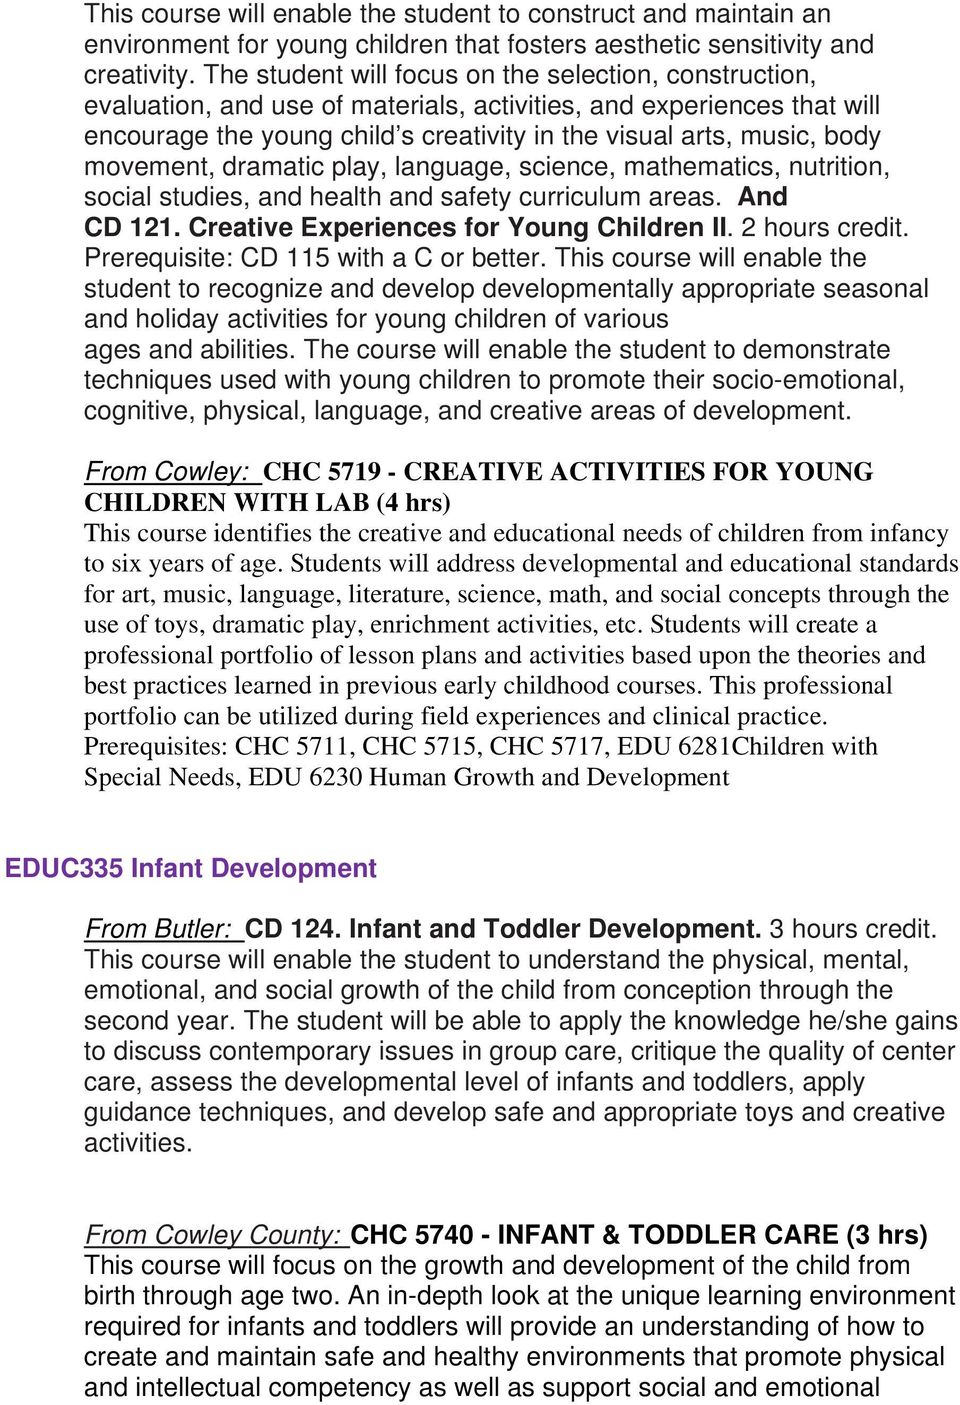 movement, dramatic play, language, science, mathematics, nutrition, social studies, and health and safety curriculum areas. And CD 121. Creative Experiences for Young Children II. 2 hours credit.